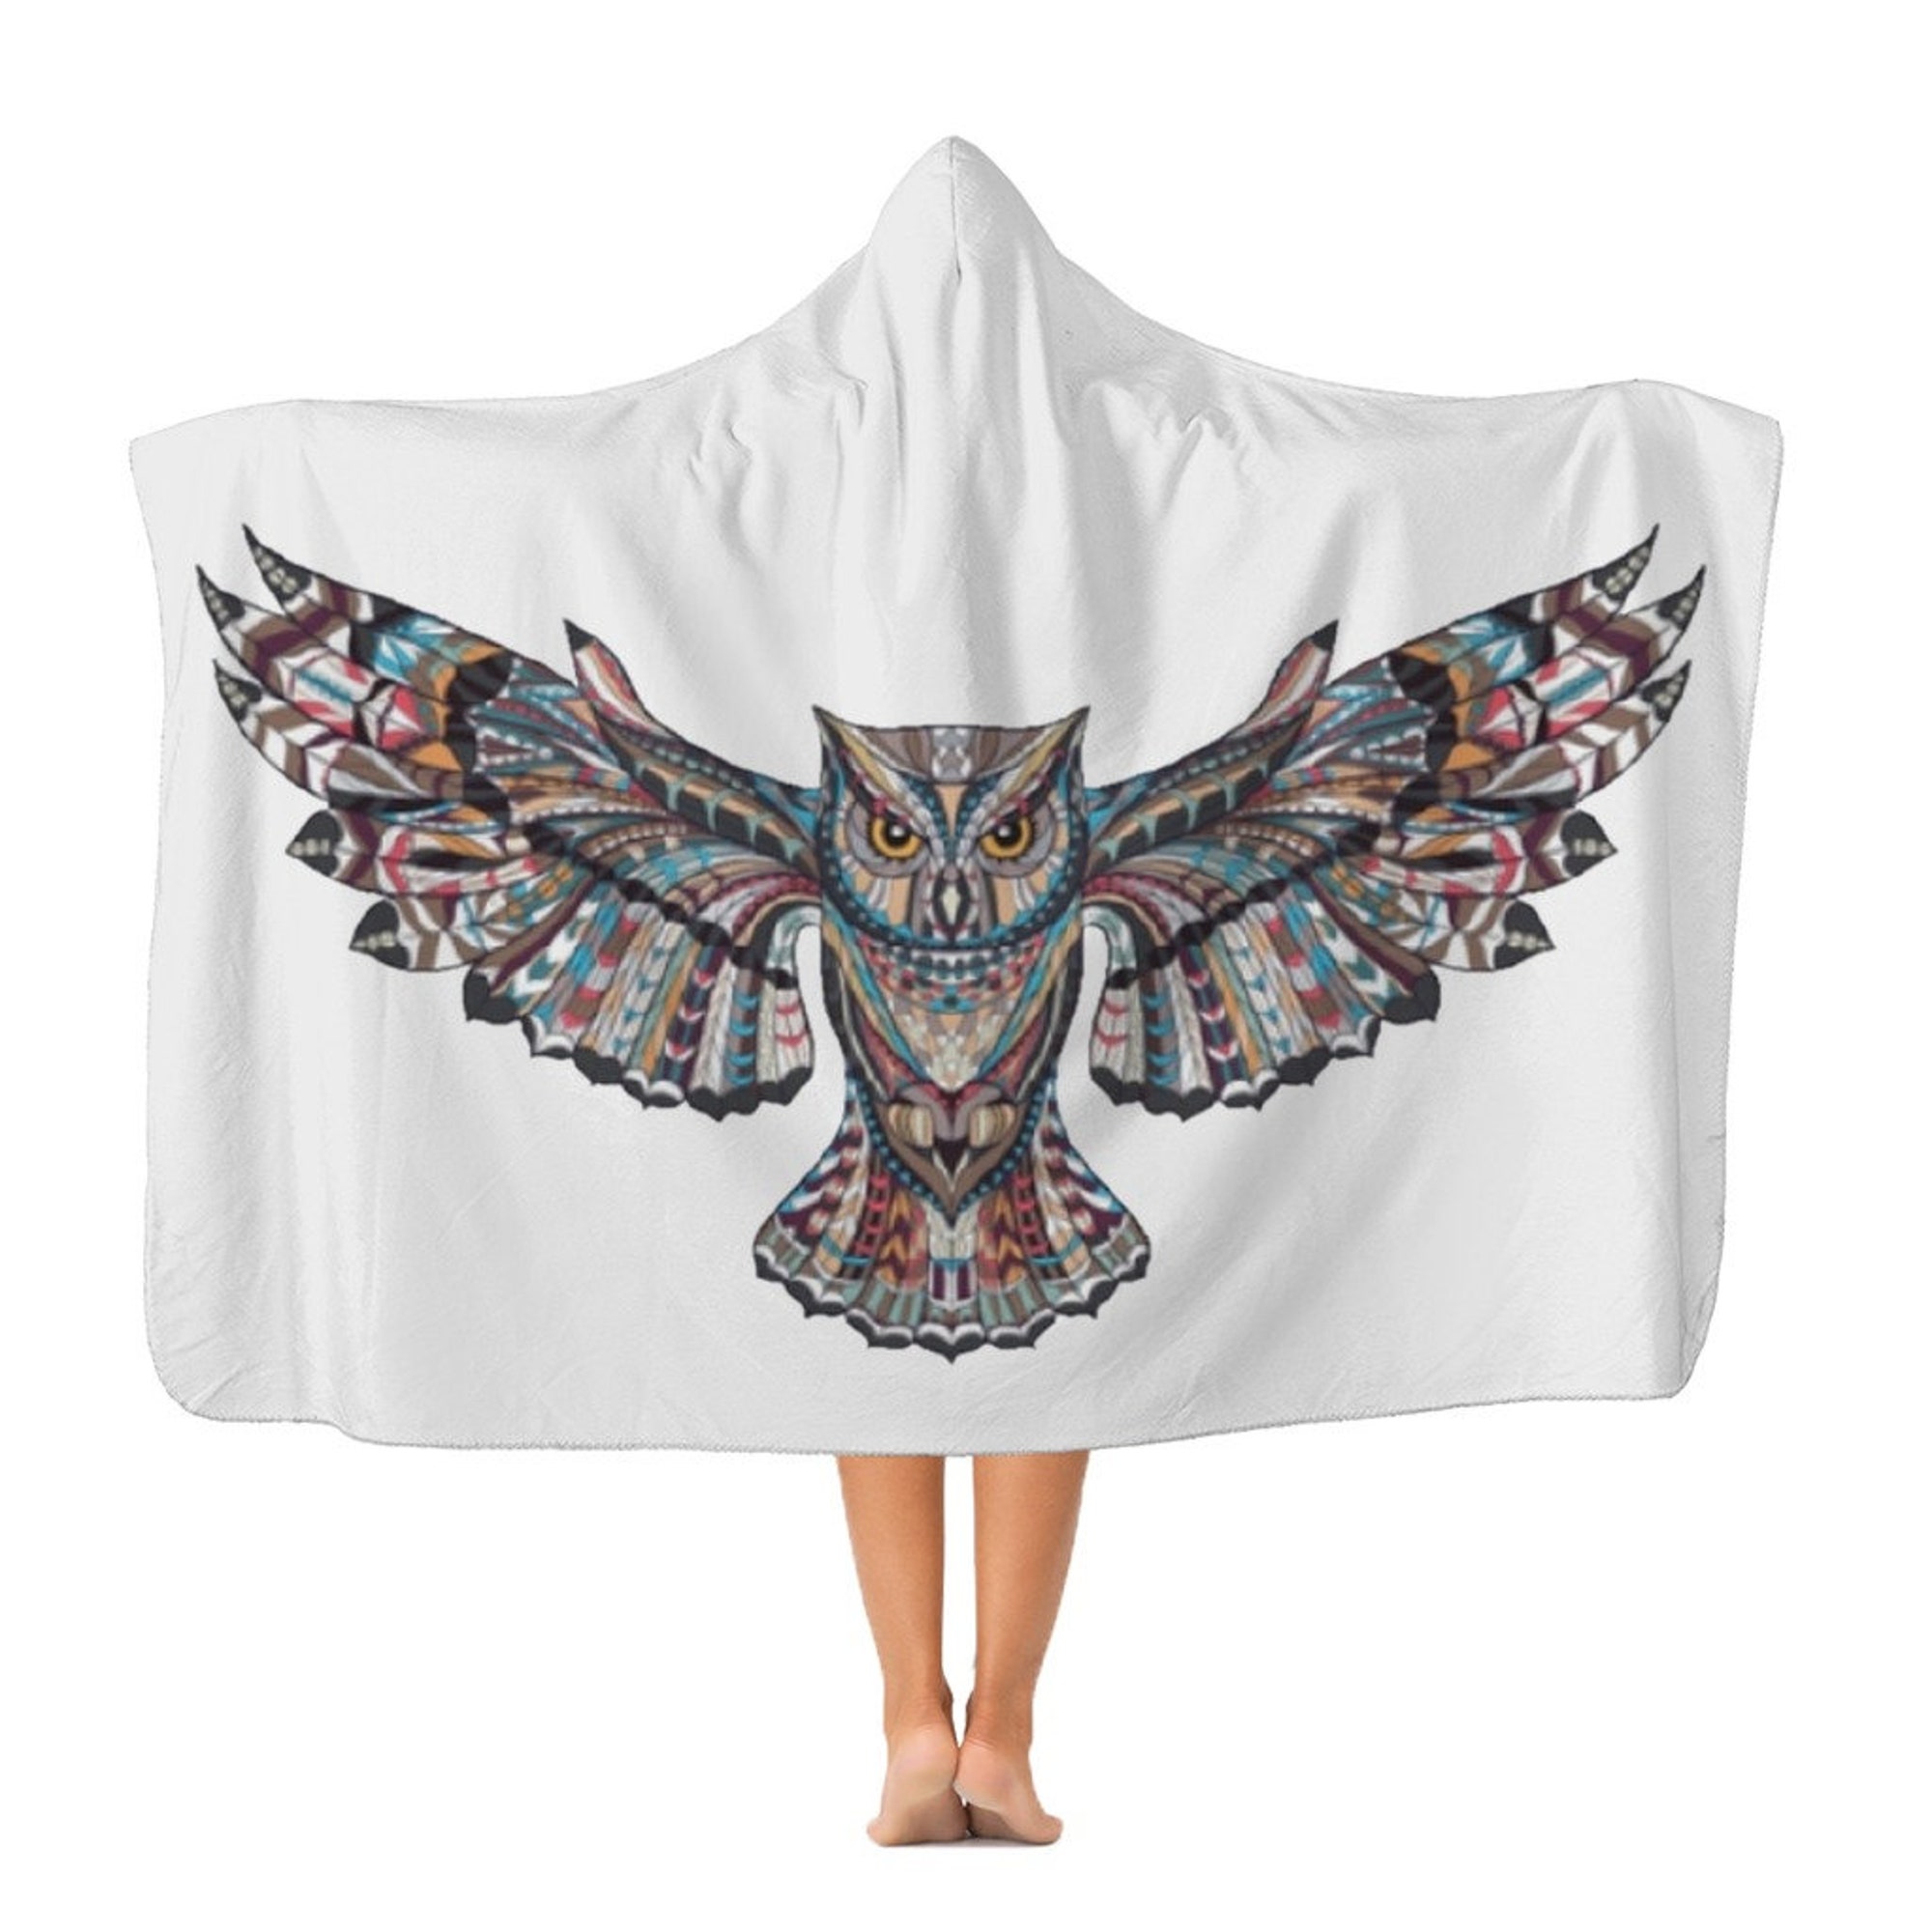 Discover Adult Hooded Blanket